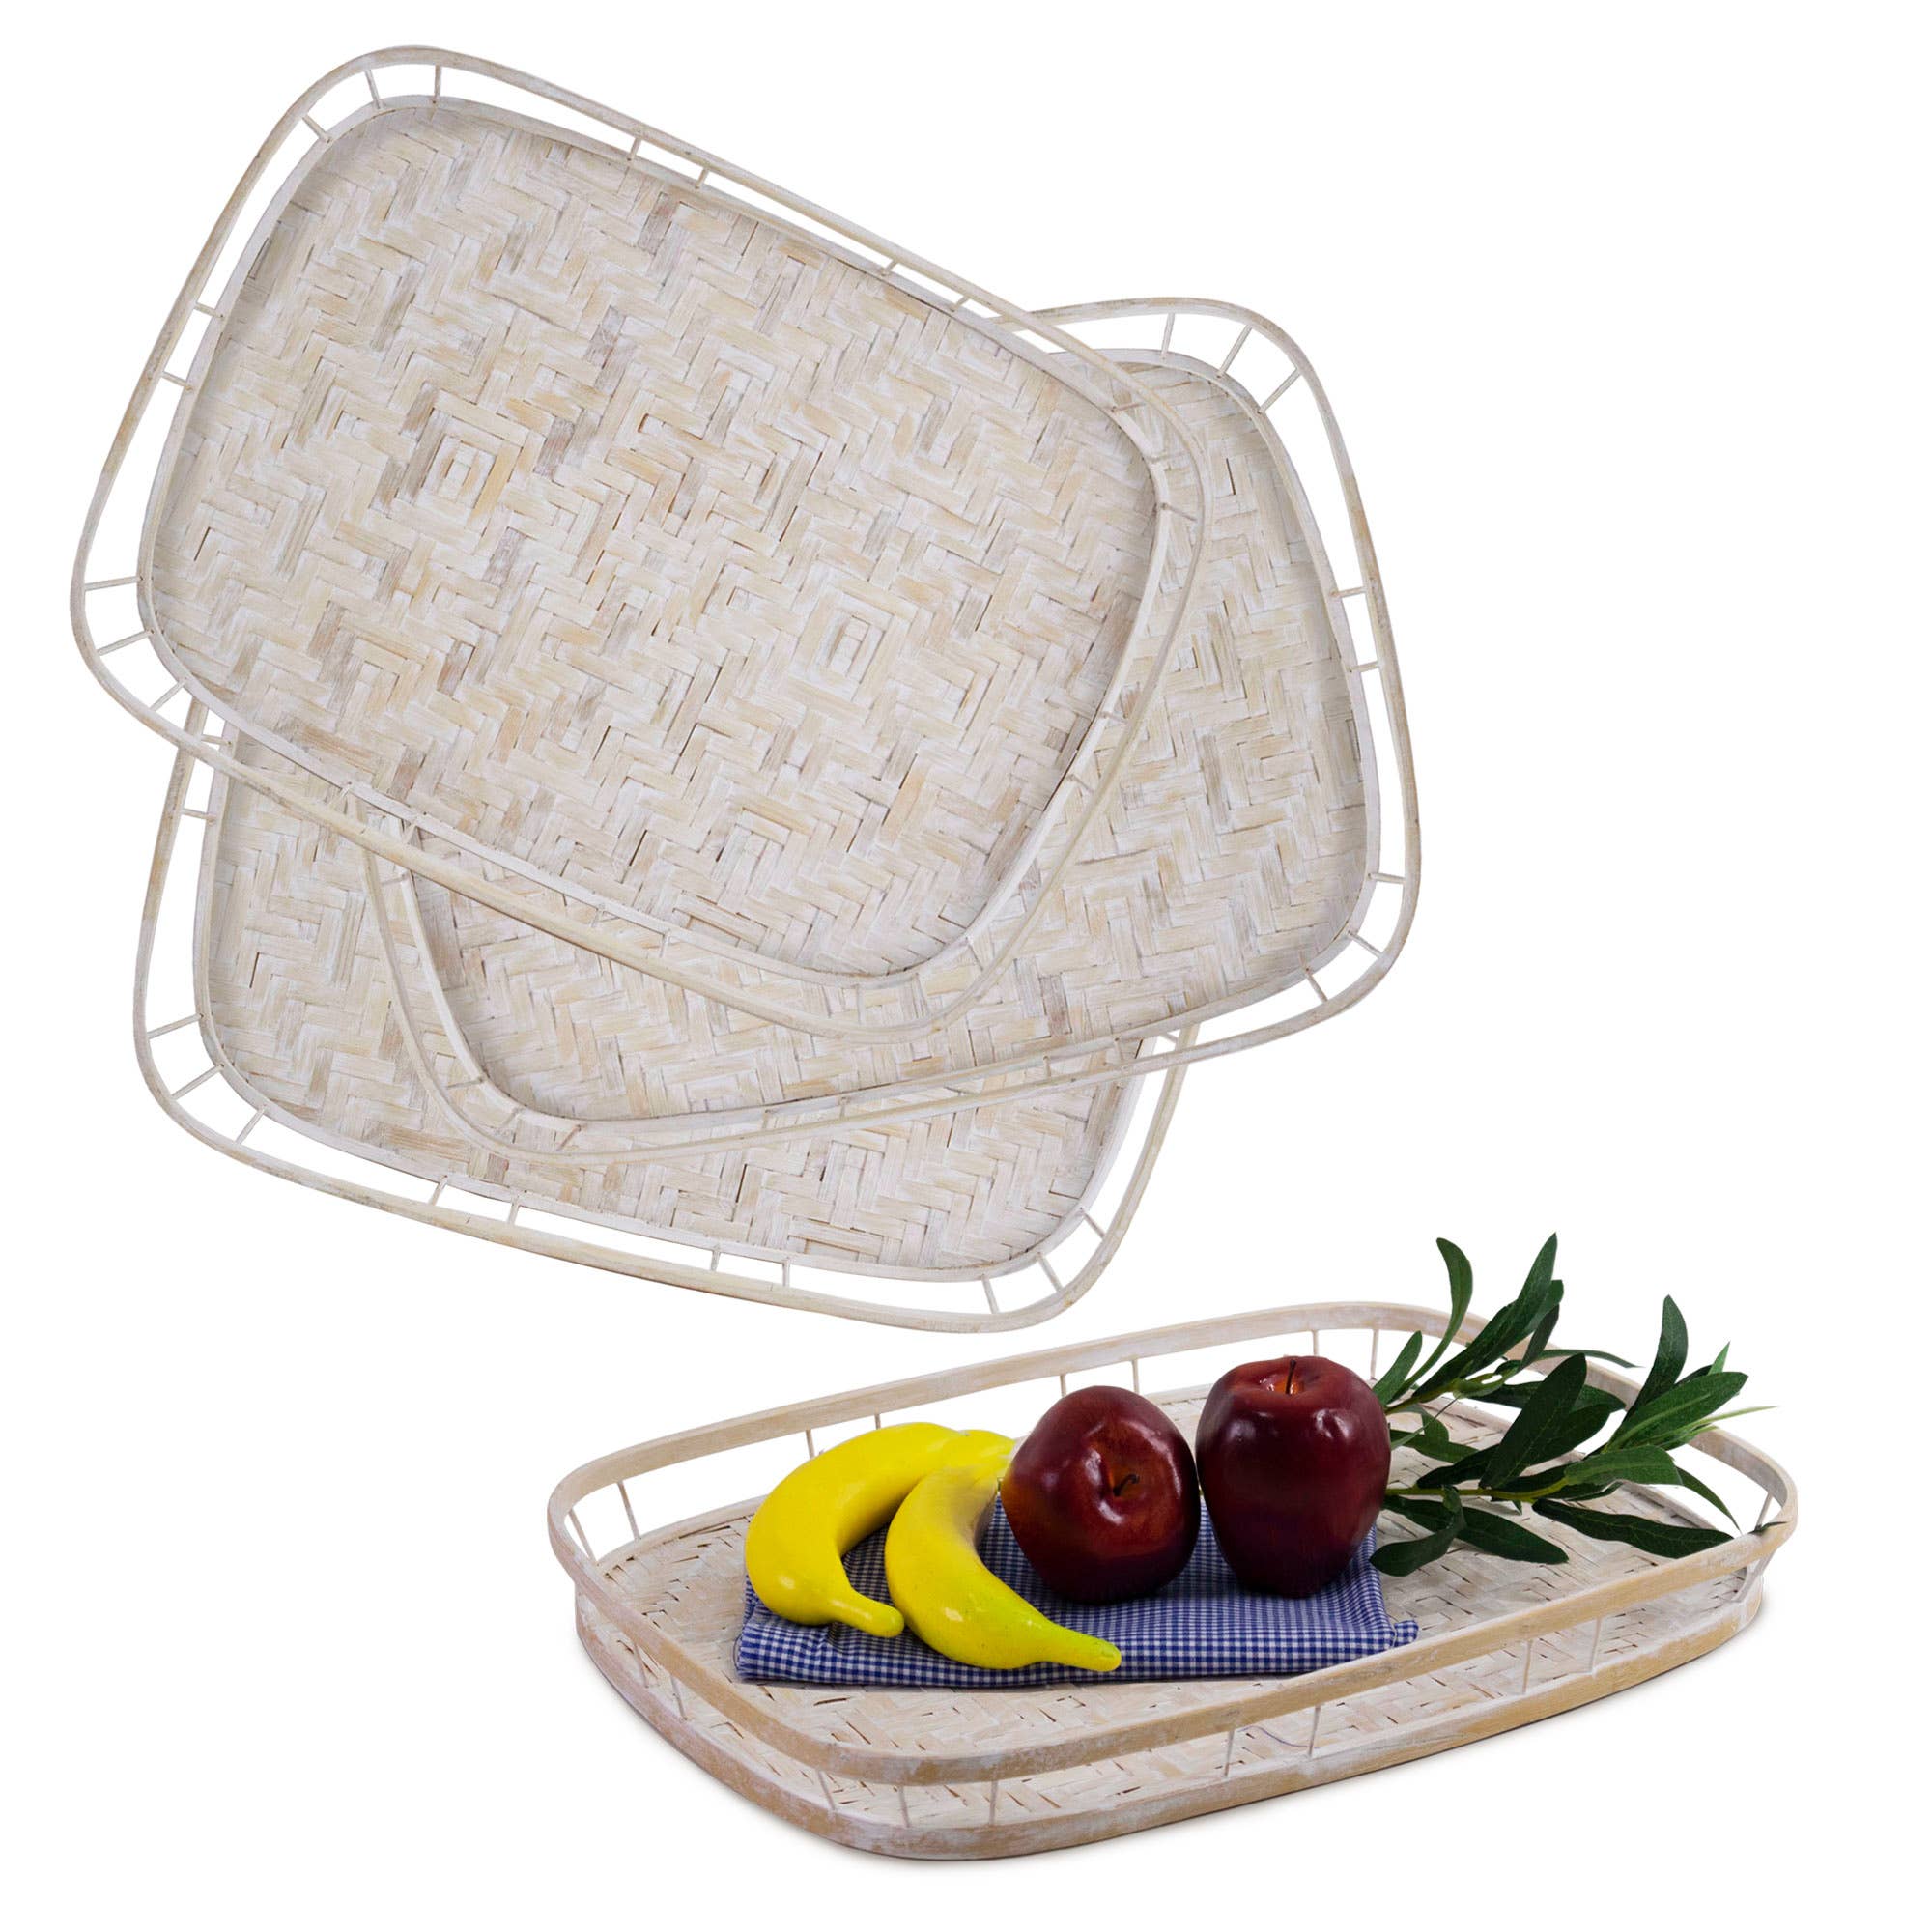 Bamboo Wicker Serving Tray